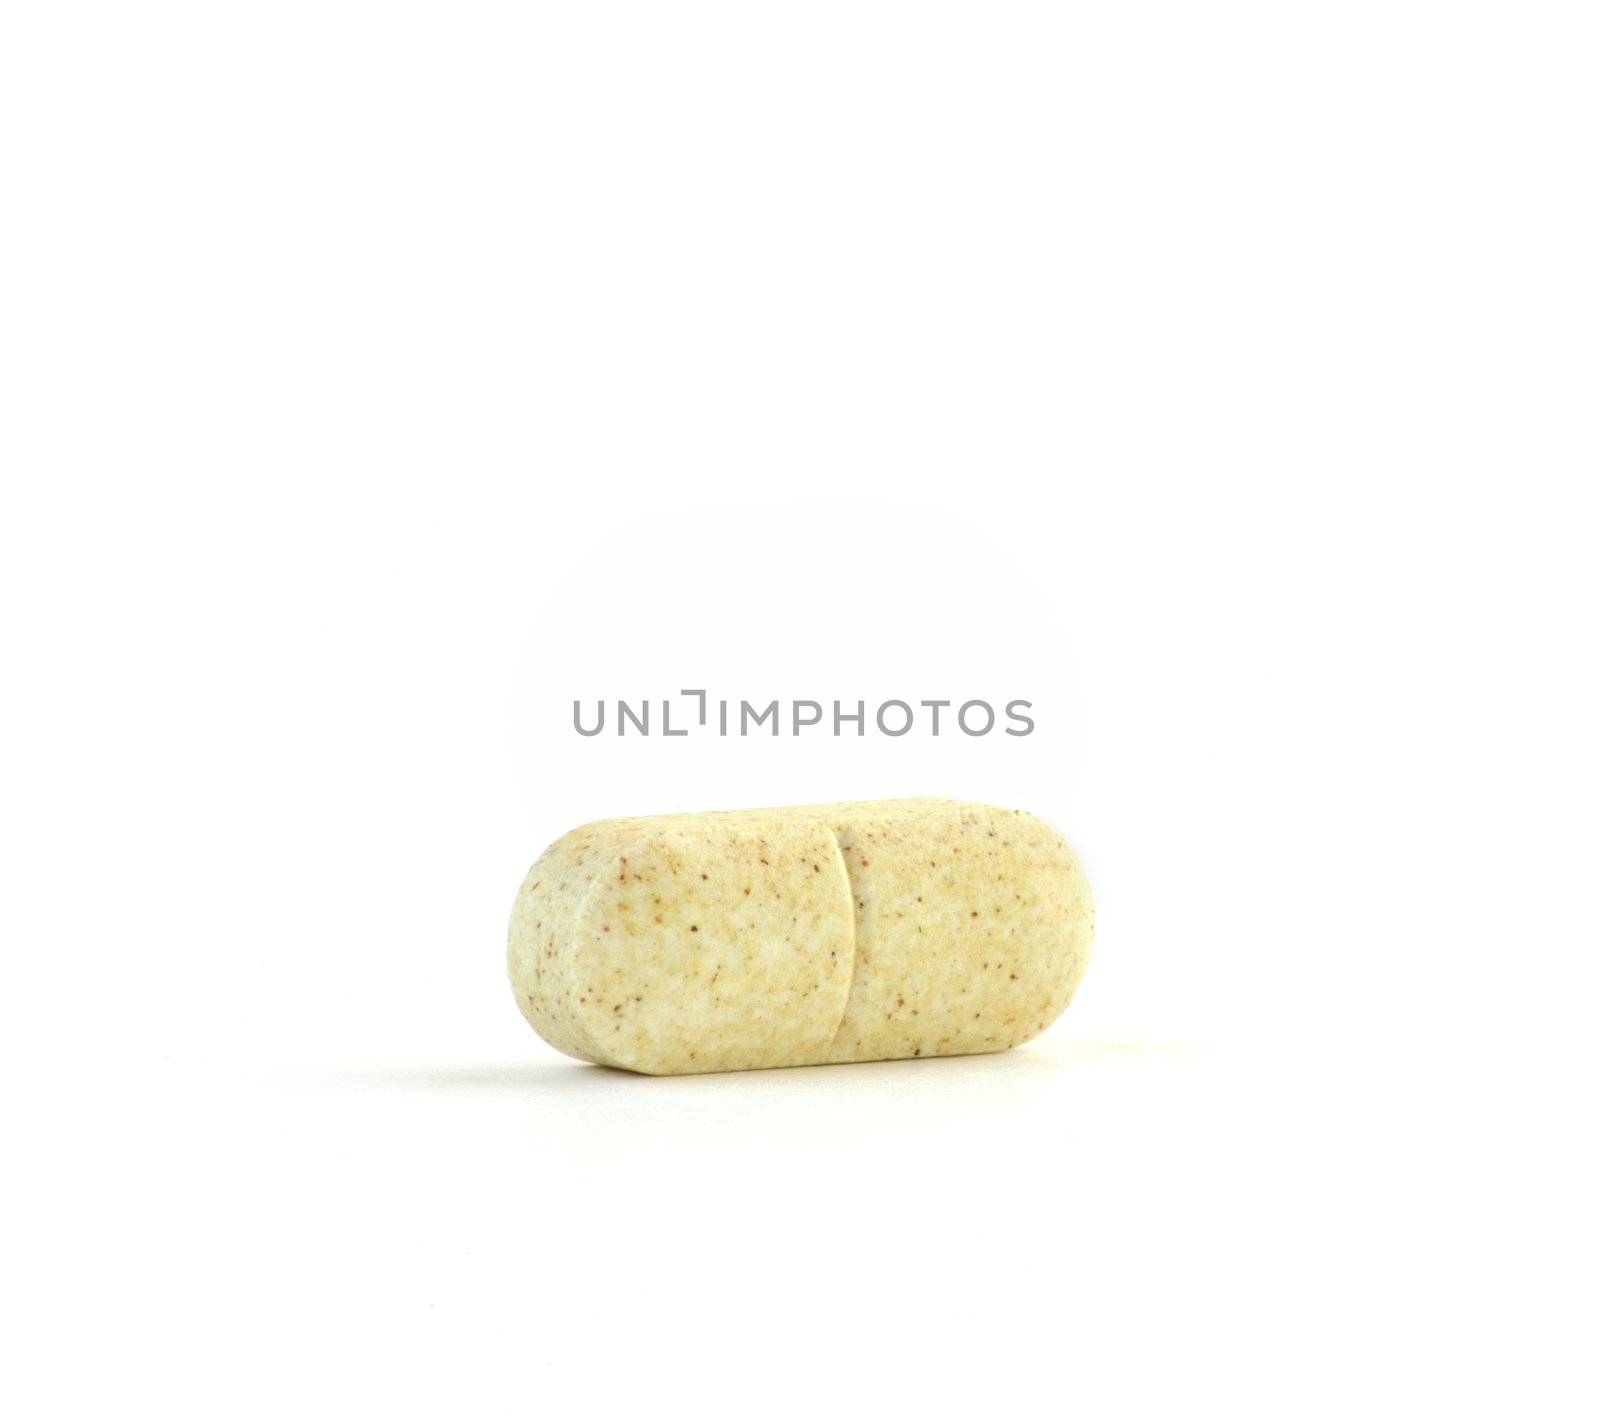 Vitamin C Tablet Against a Pure White Background by Creatista